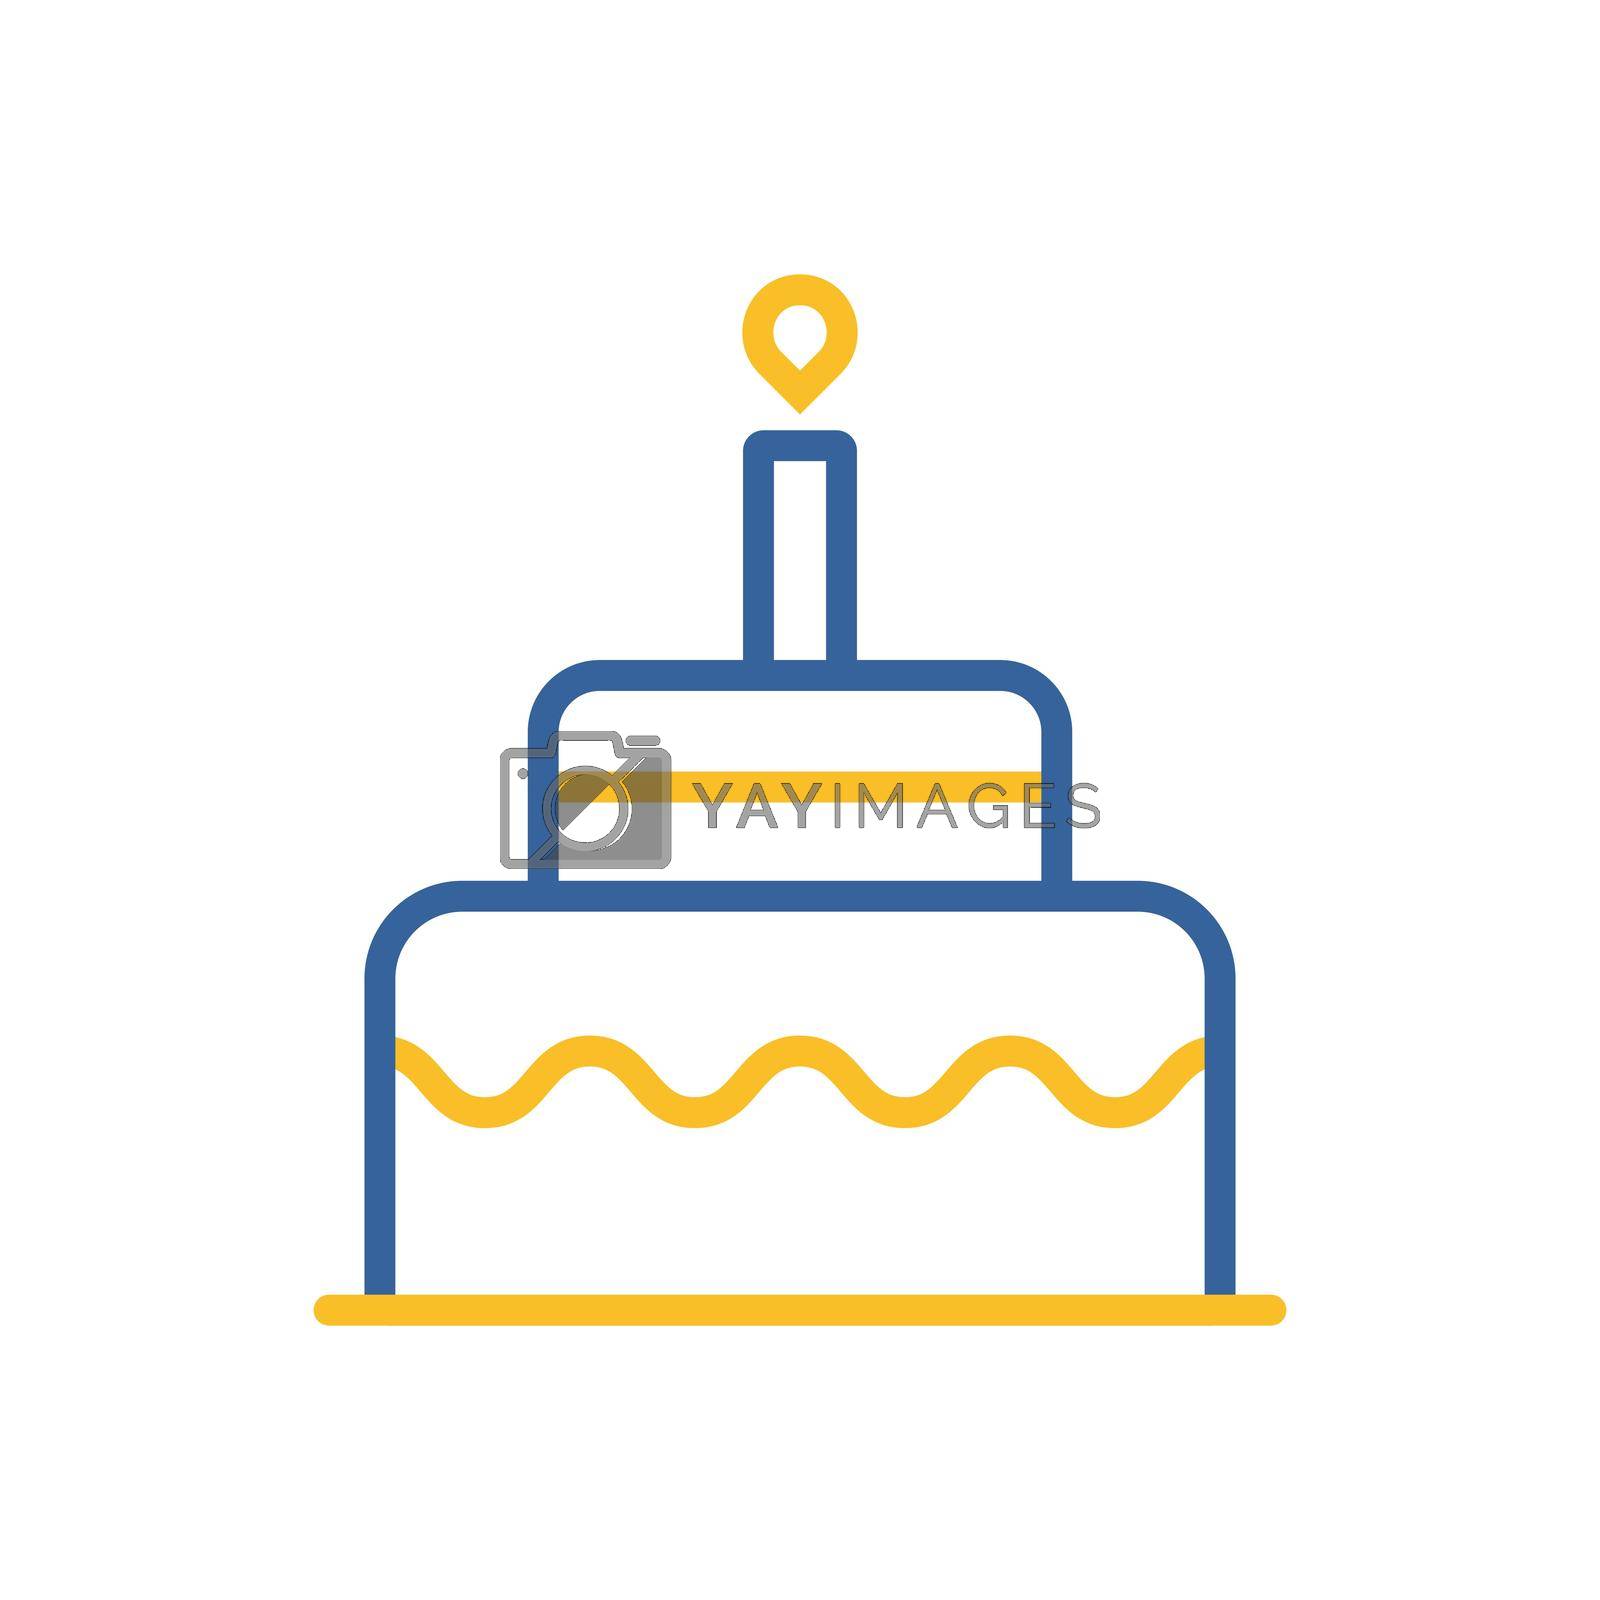 Birthday cake vector isolated icon. Graph symbol for children and newborn babies web site and apps design, logo, app, UI